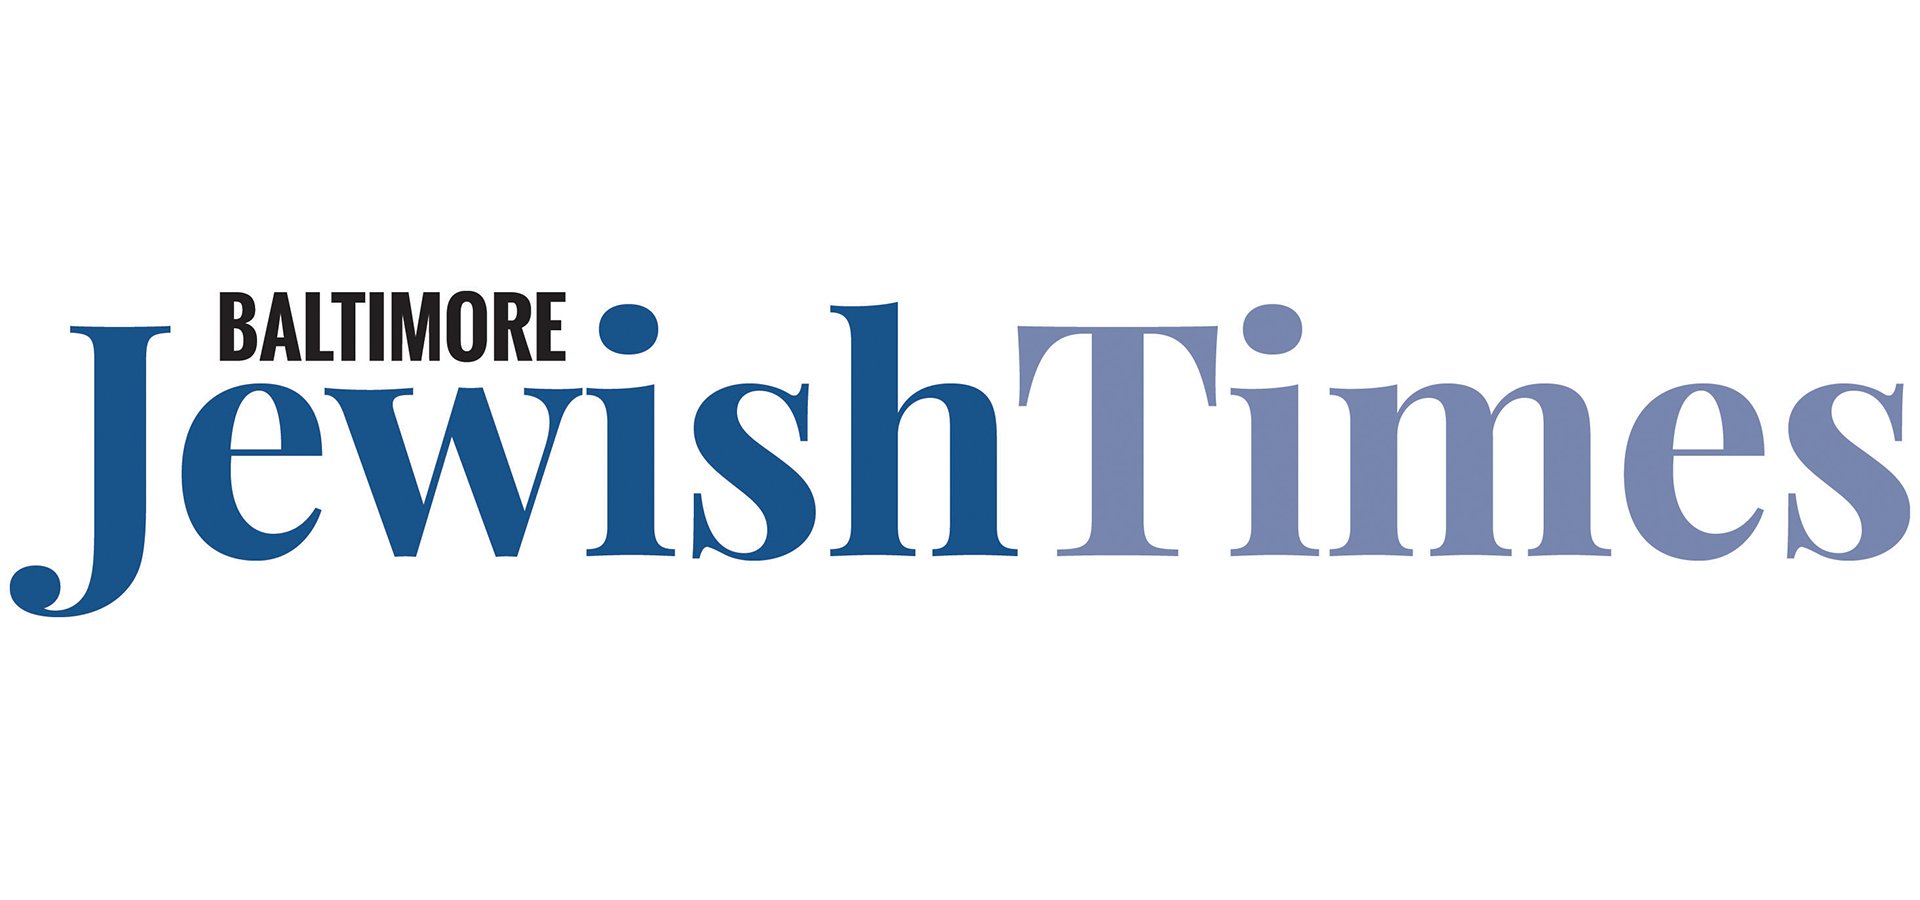 baltimore jewish times logo about what you should know by michael silberman